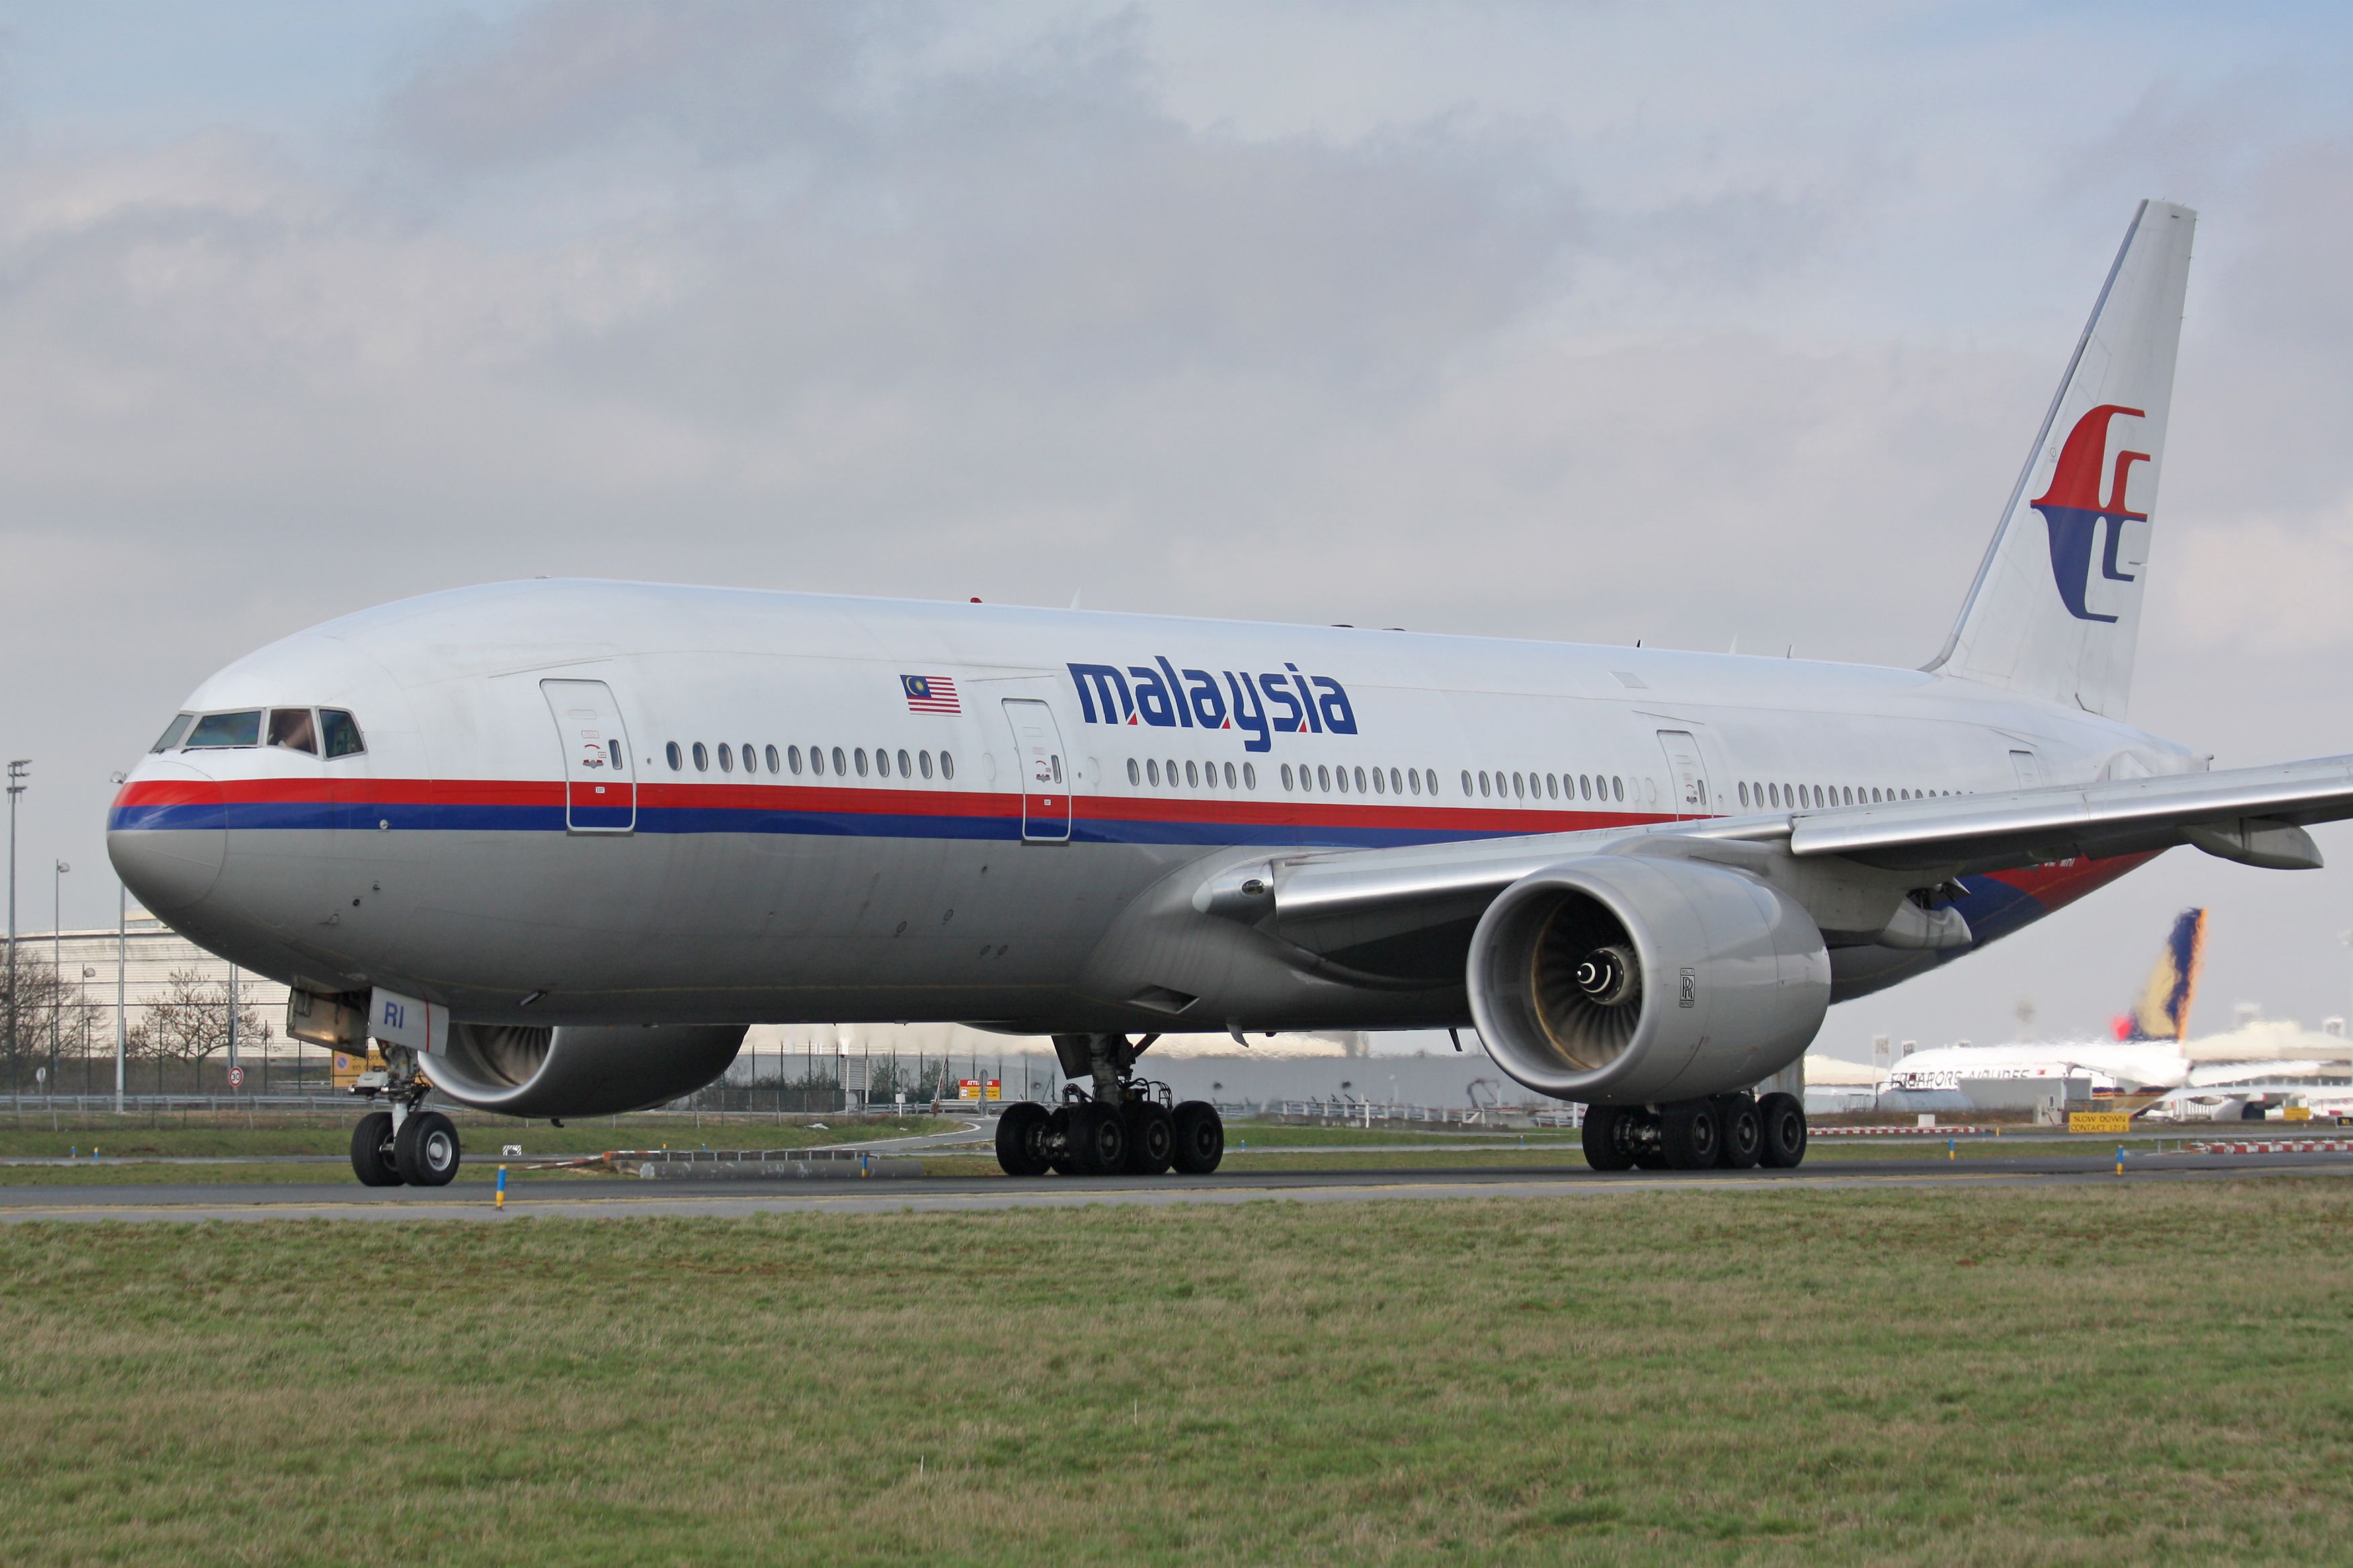 A Malaysia Airlines Boeing 777 on an airport apron.